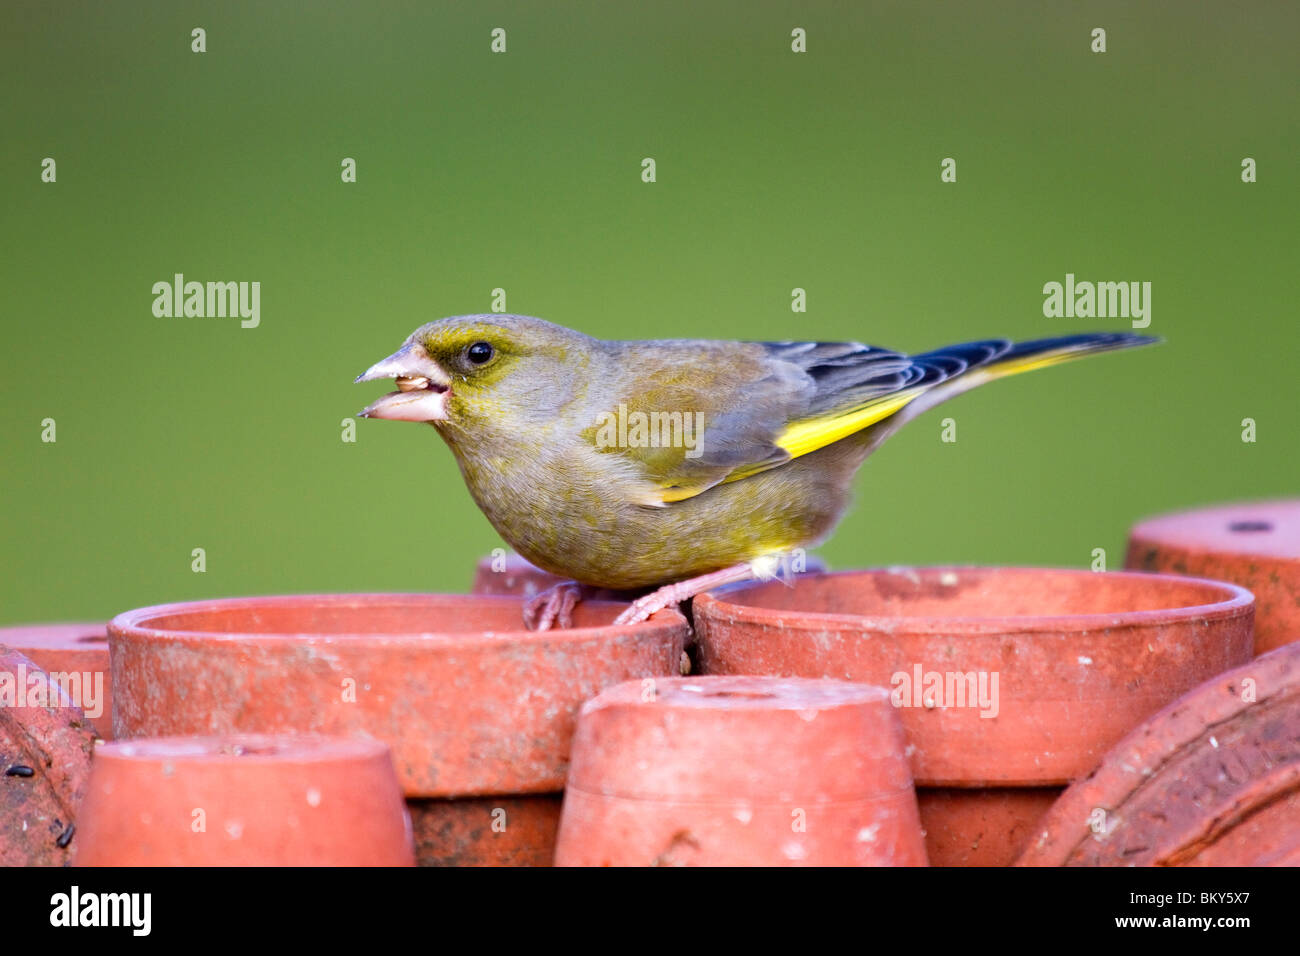 Greenfinch; Carduelis chloris; on plant pots; with seed in beak Stock Photo